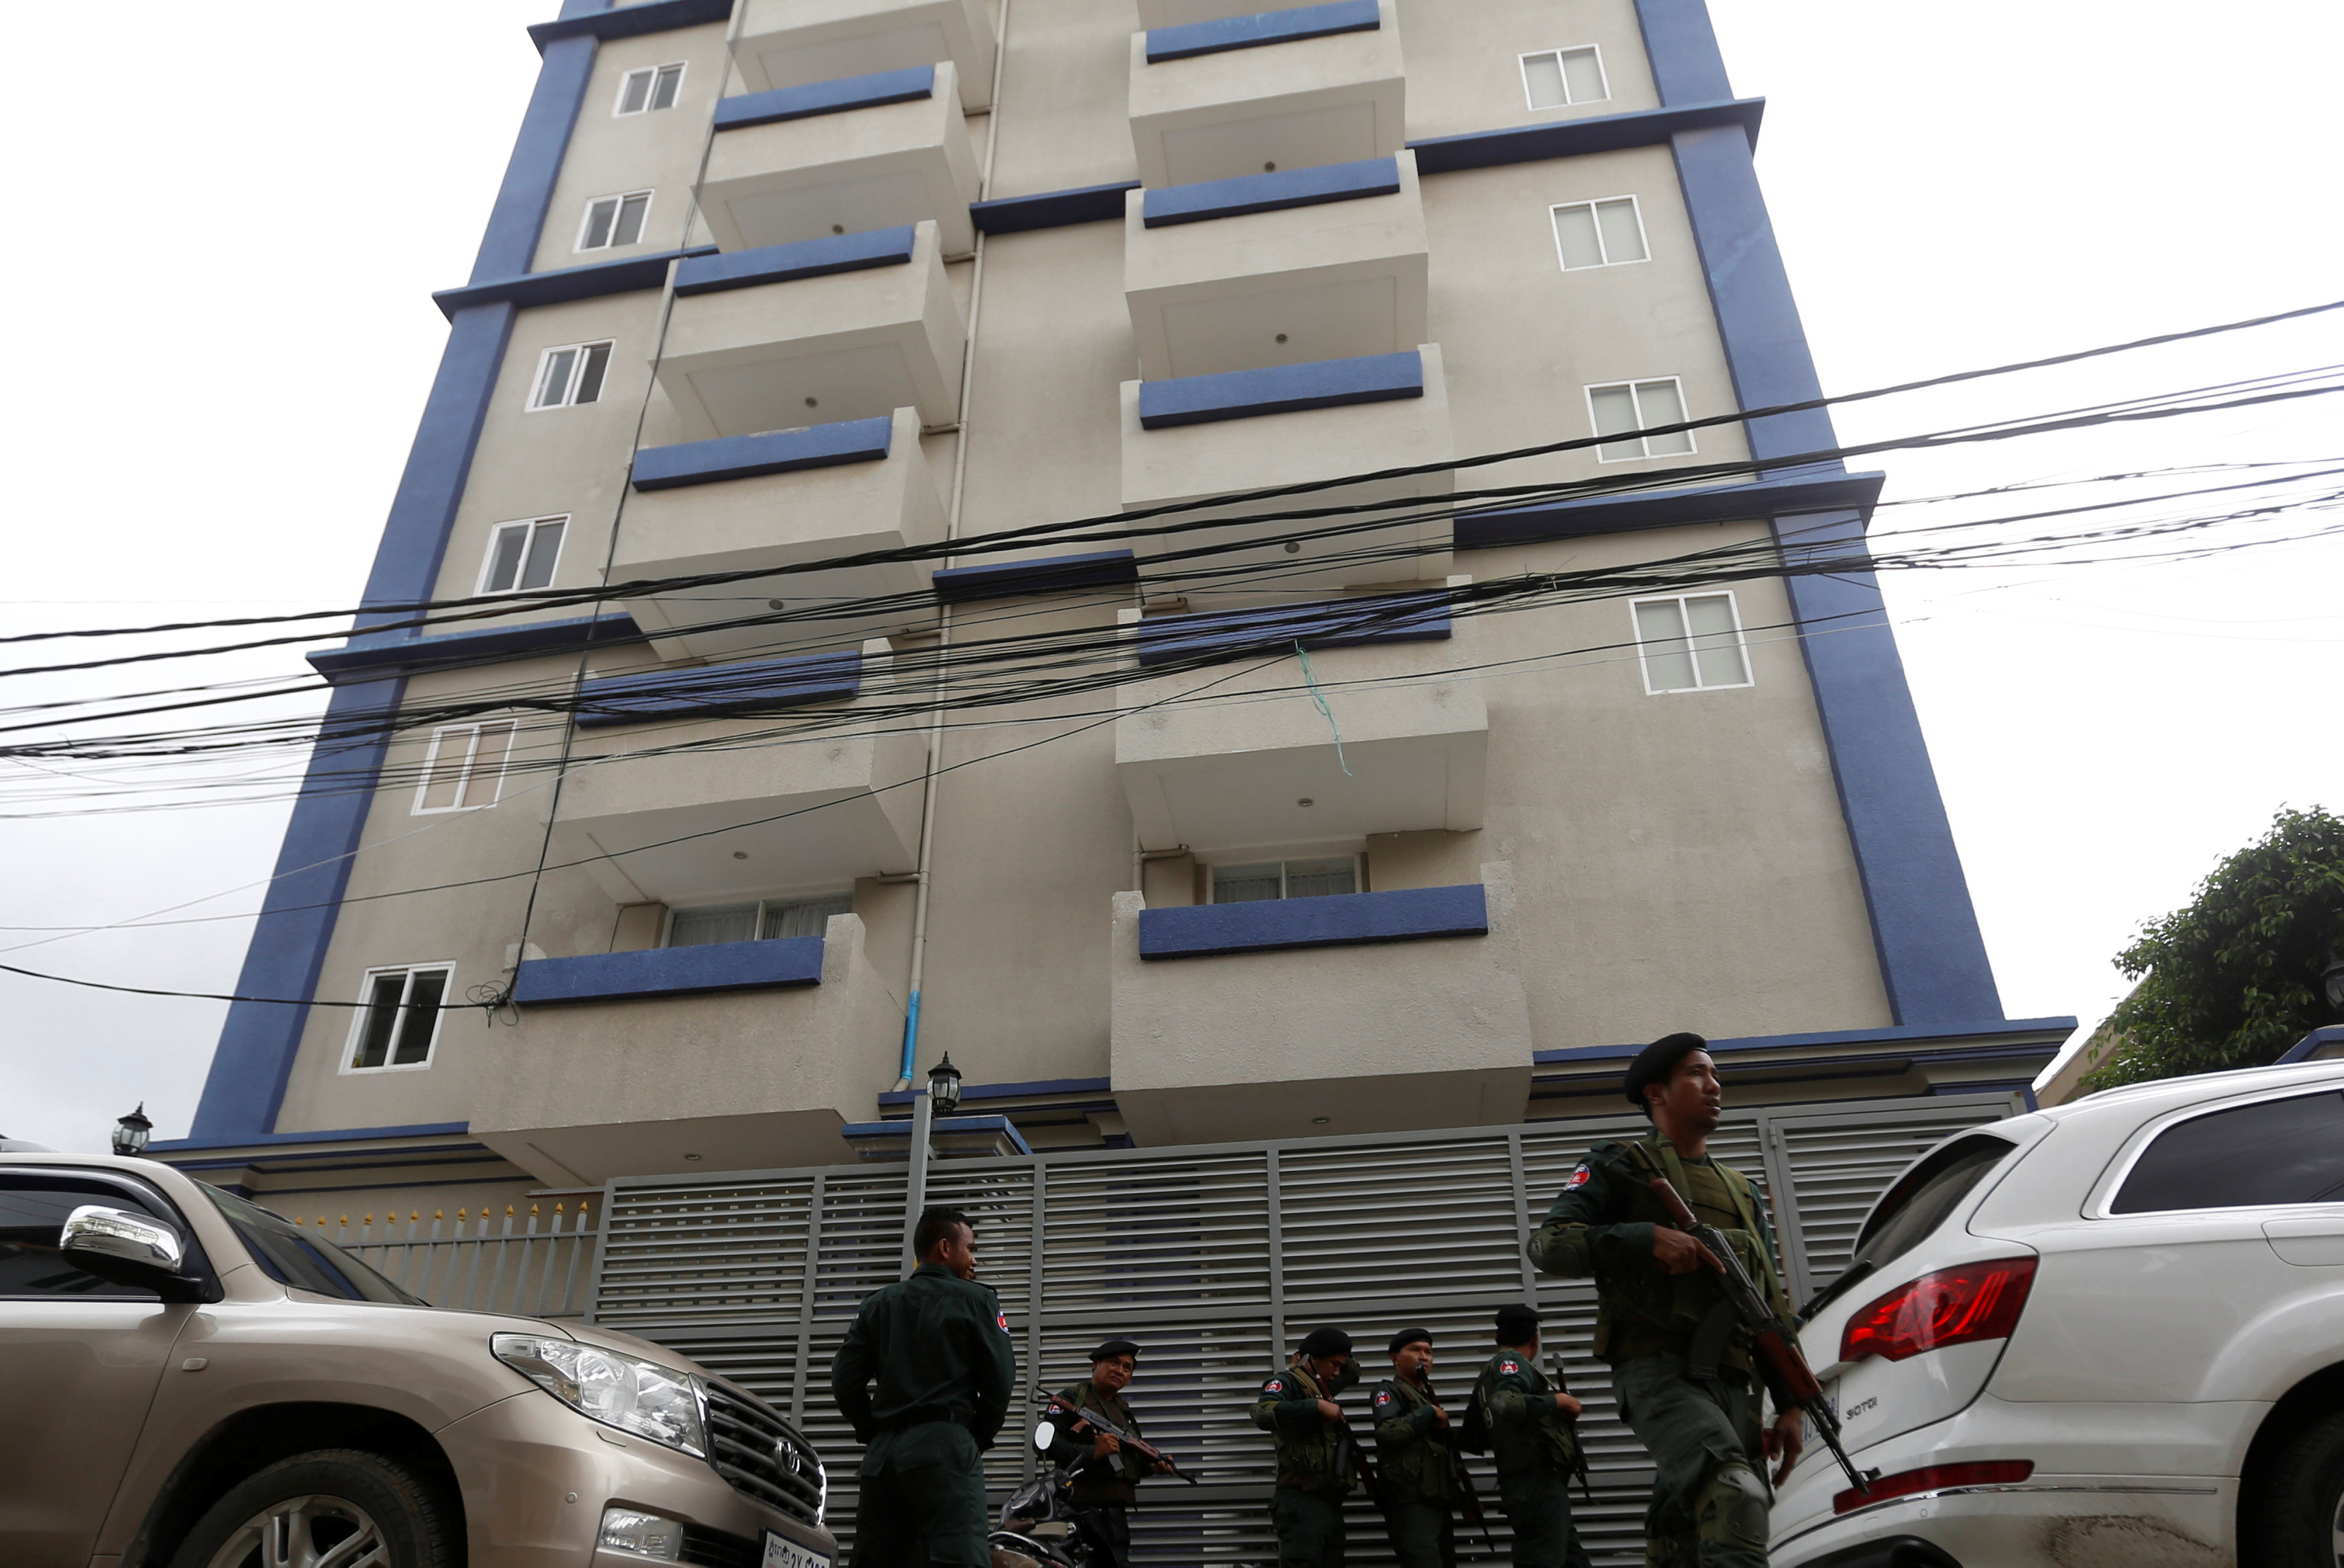 Chinese took over 11-storey block in Cambodia, set up criminal call centre